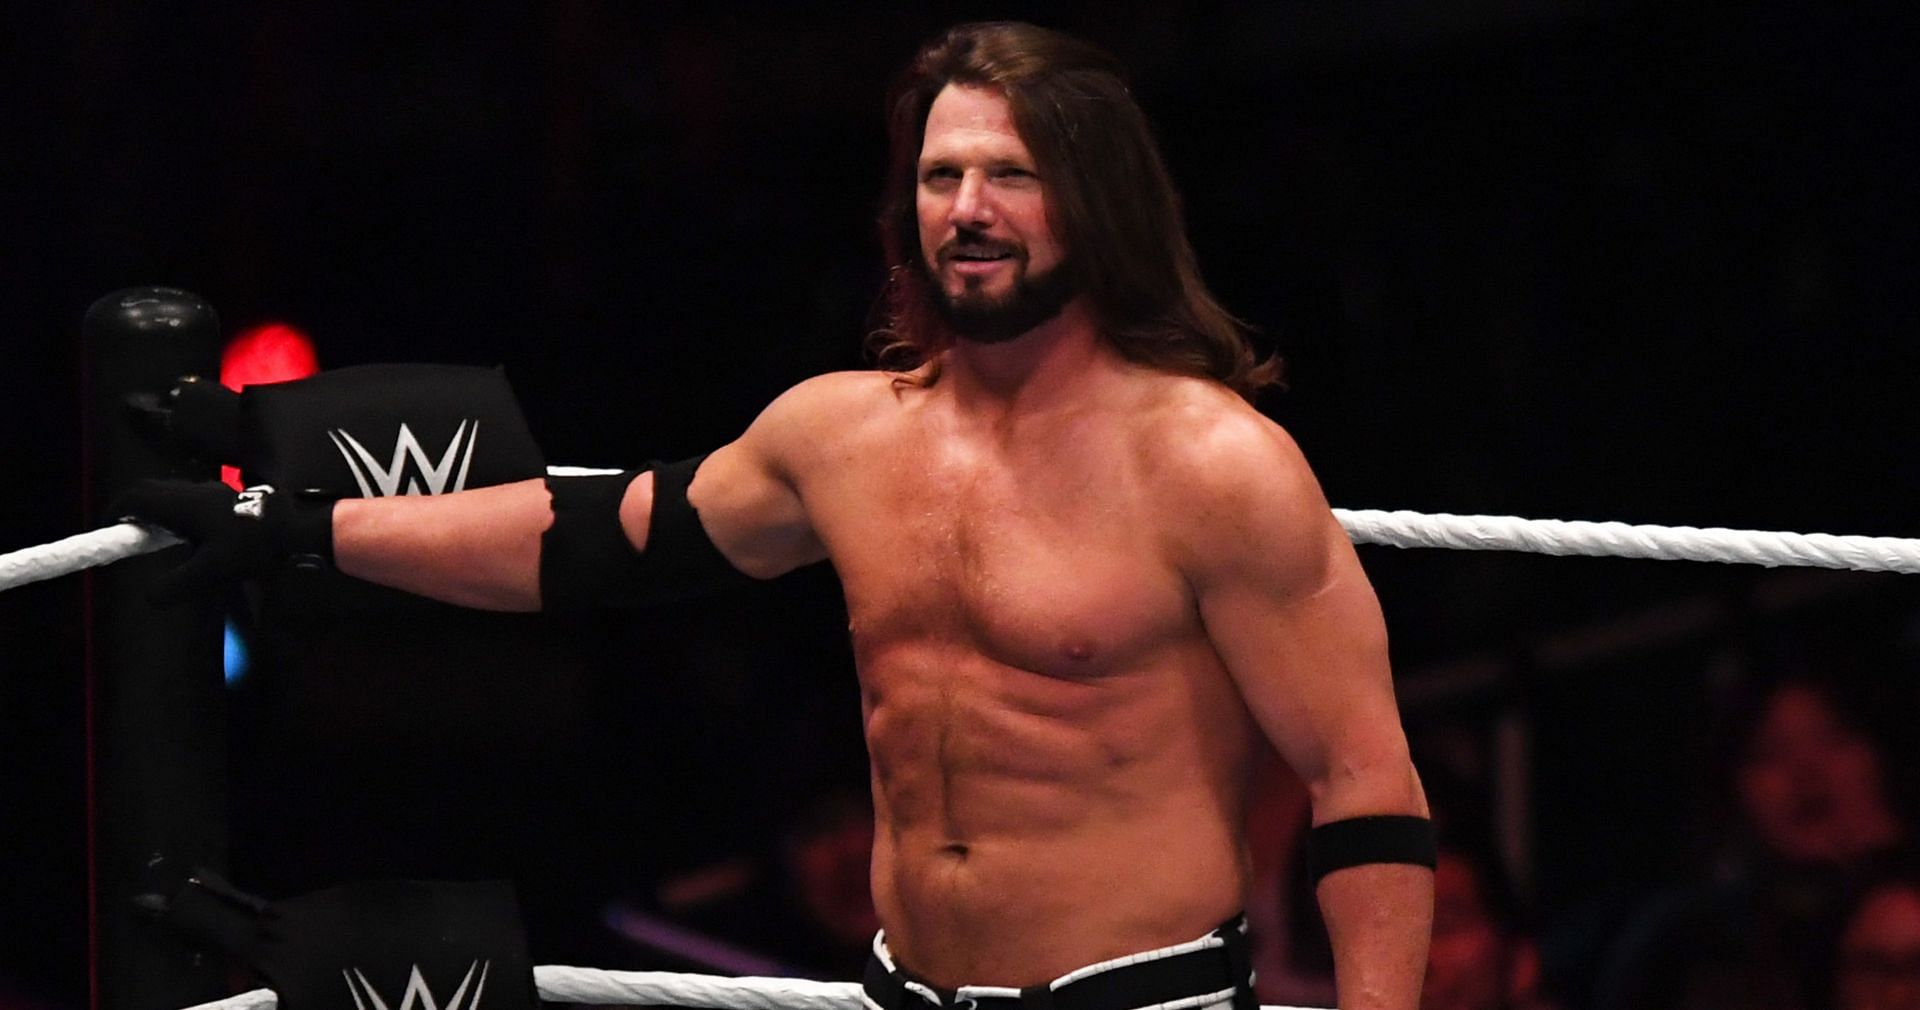 AJ Styles is currently out of action due to injury